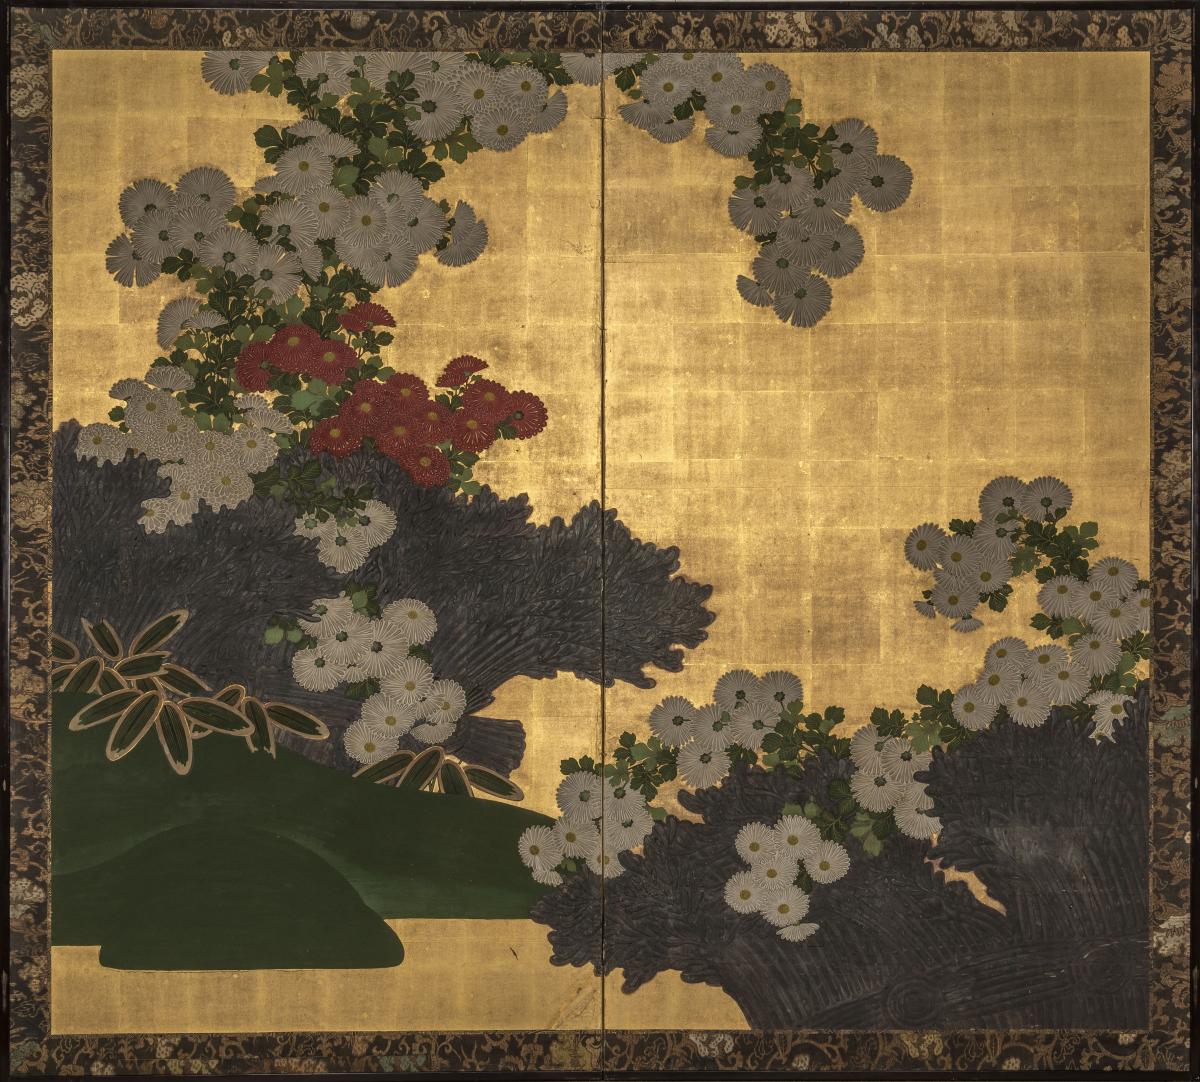 A two-fold screen with chrysanthemums